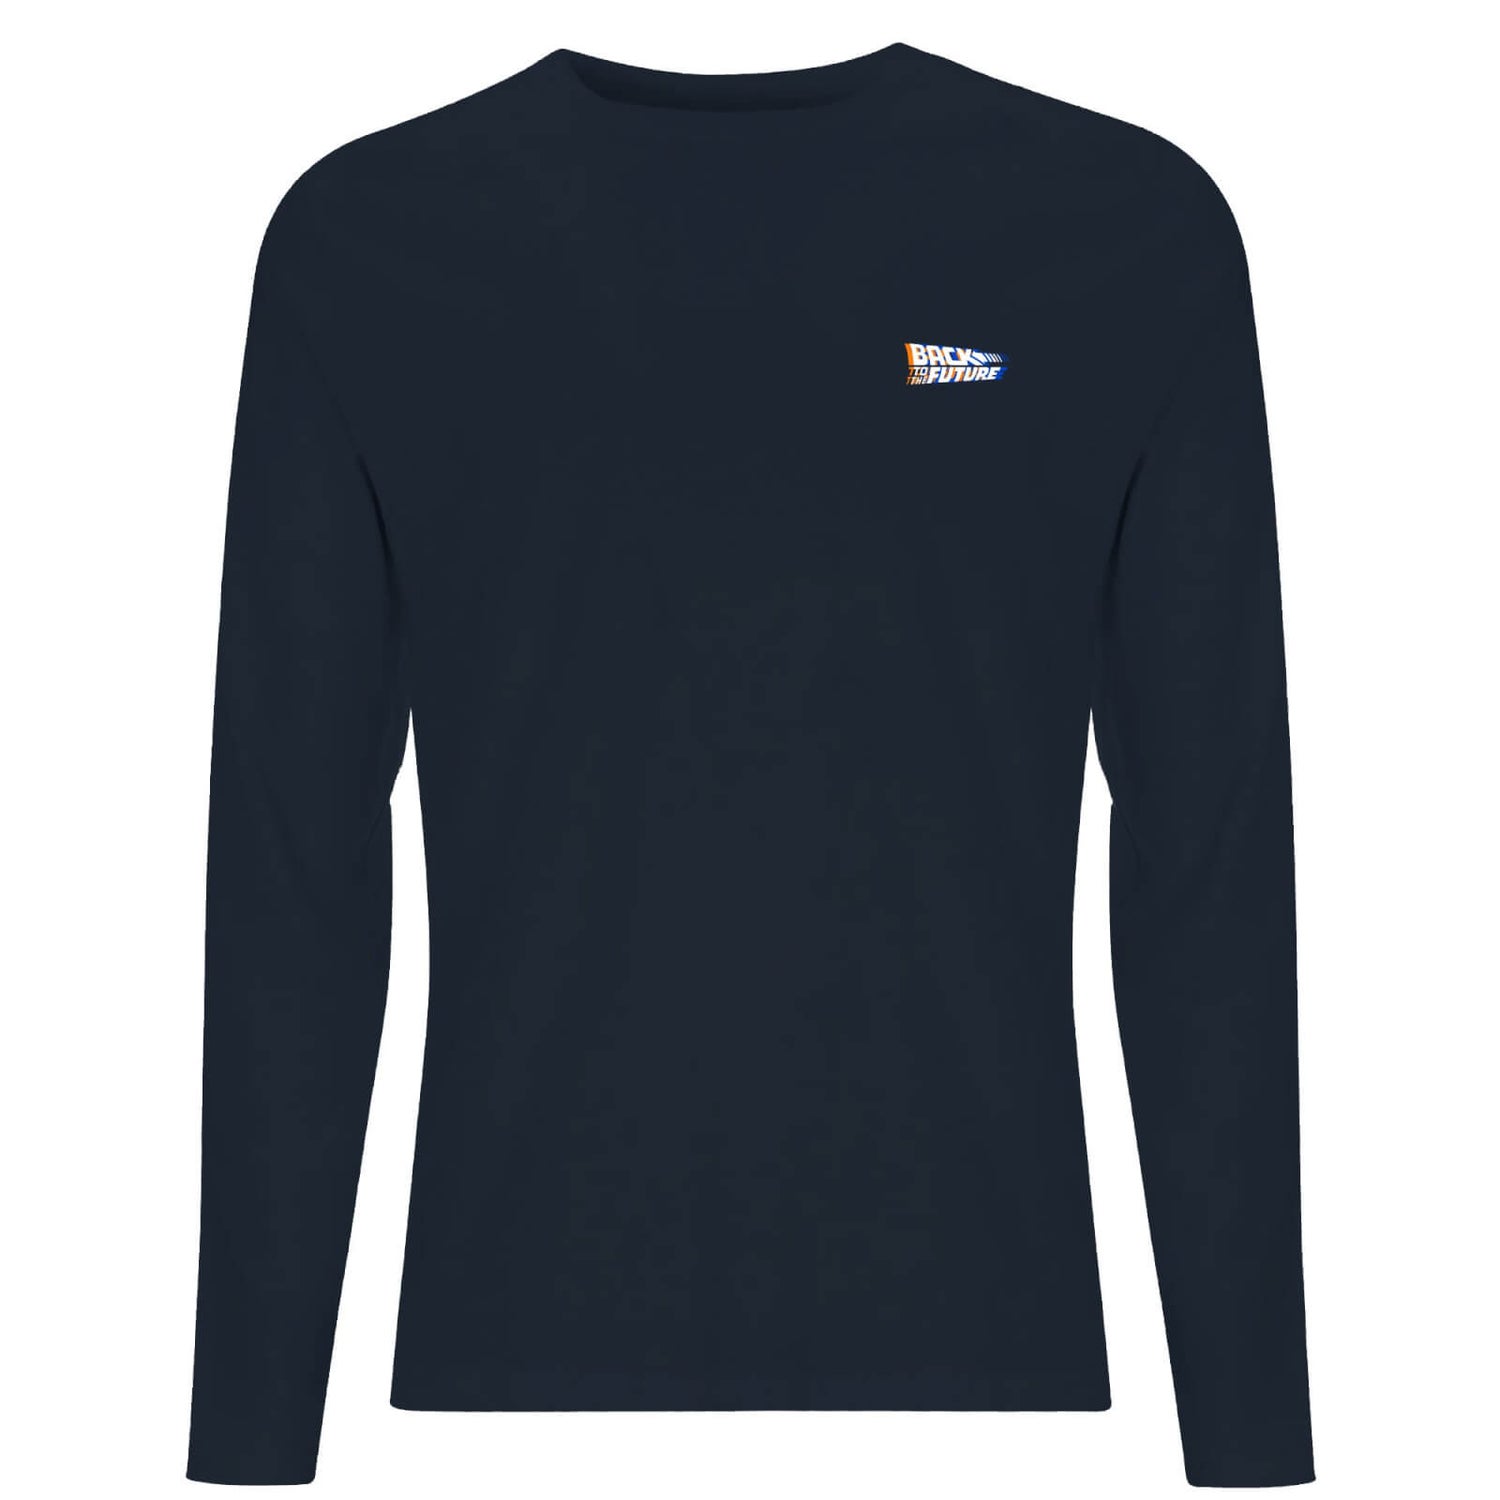 Back To The Future Men's Long Sleeve T-Shirt - Navy